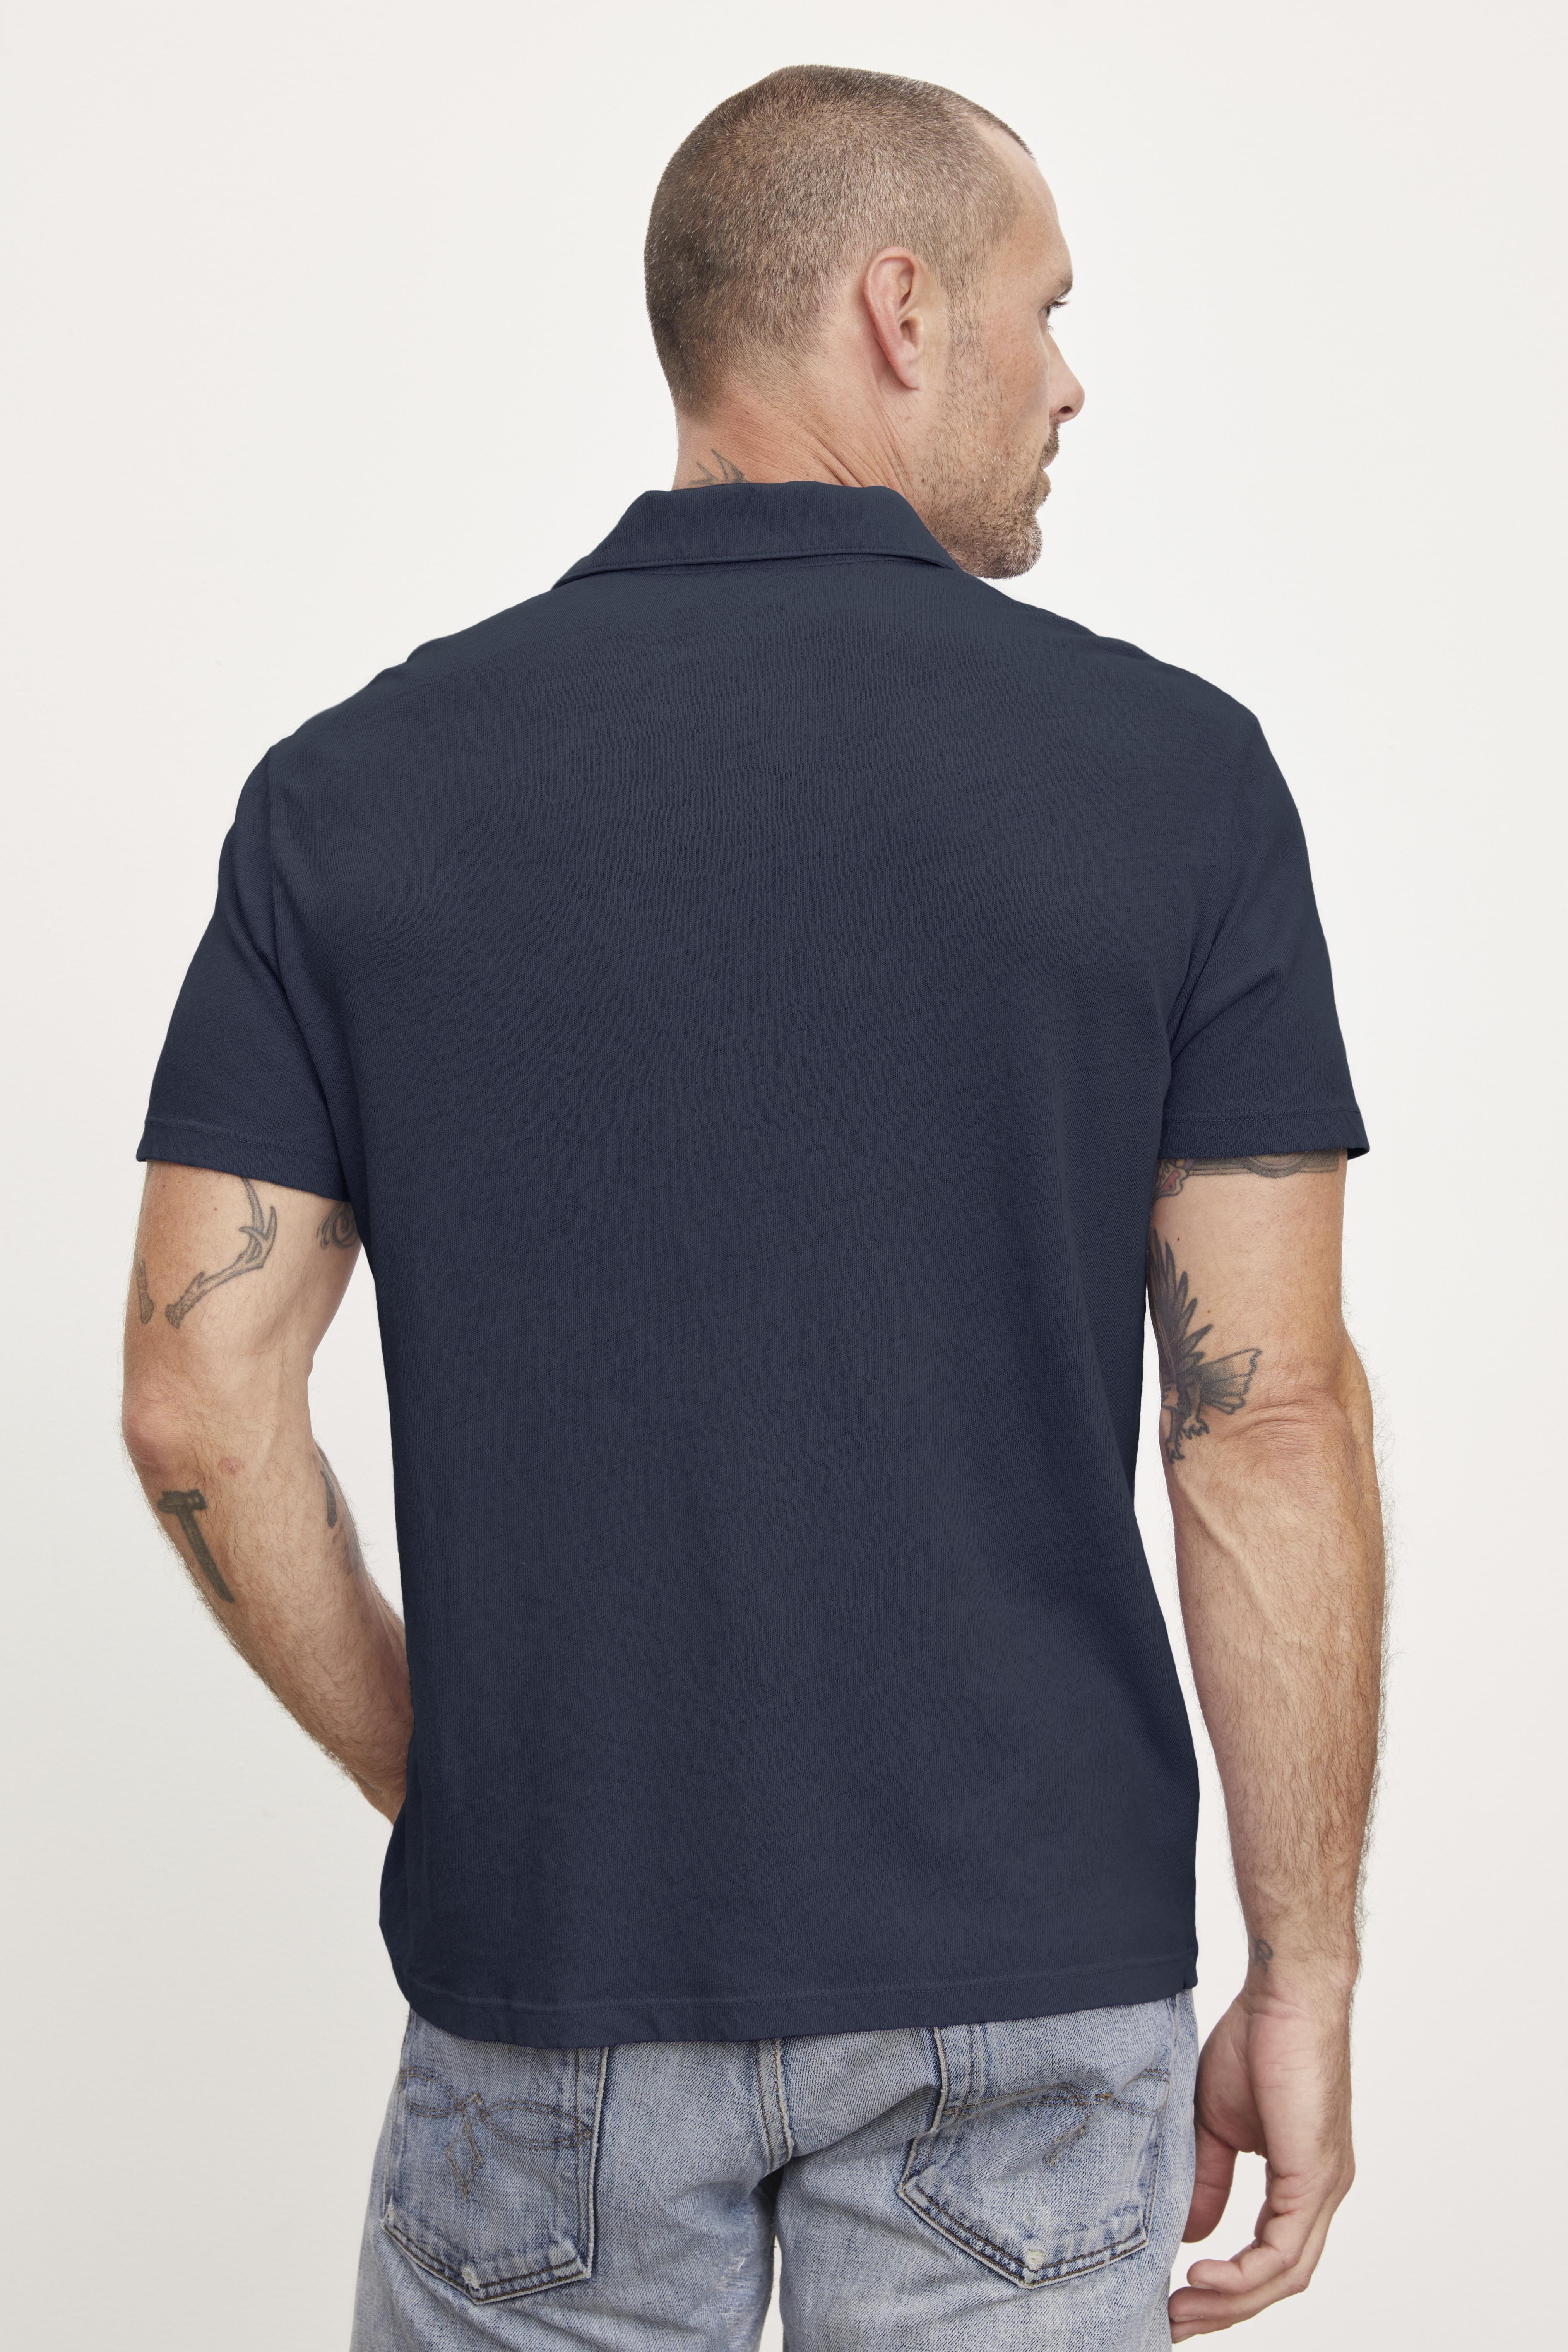   Man wearing a Velvet by Graham & Spencer BECK POLO and jeans, viewed from behind, with visible tattoos on his left arm. 